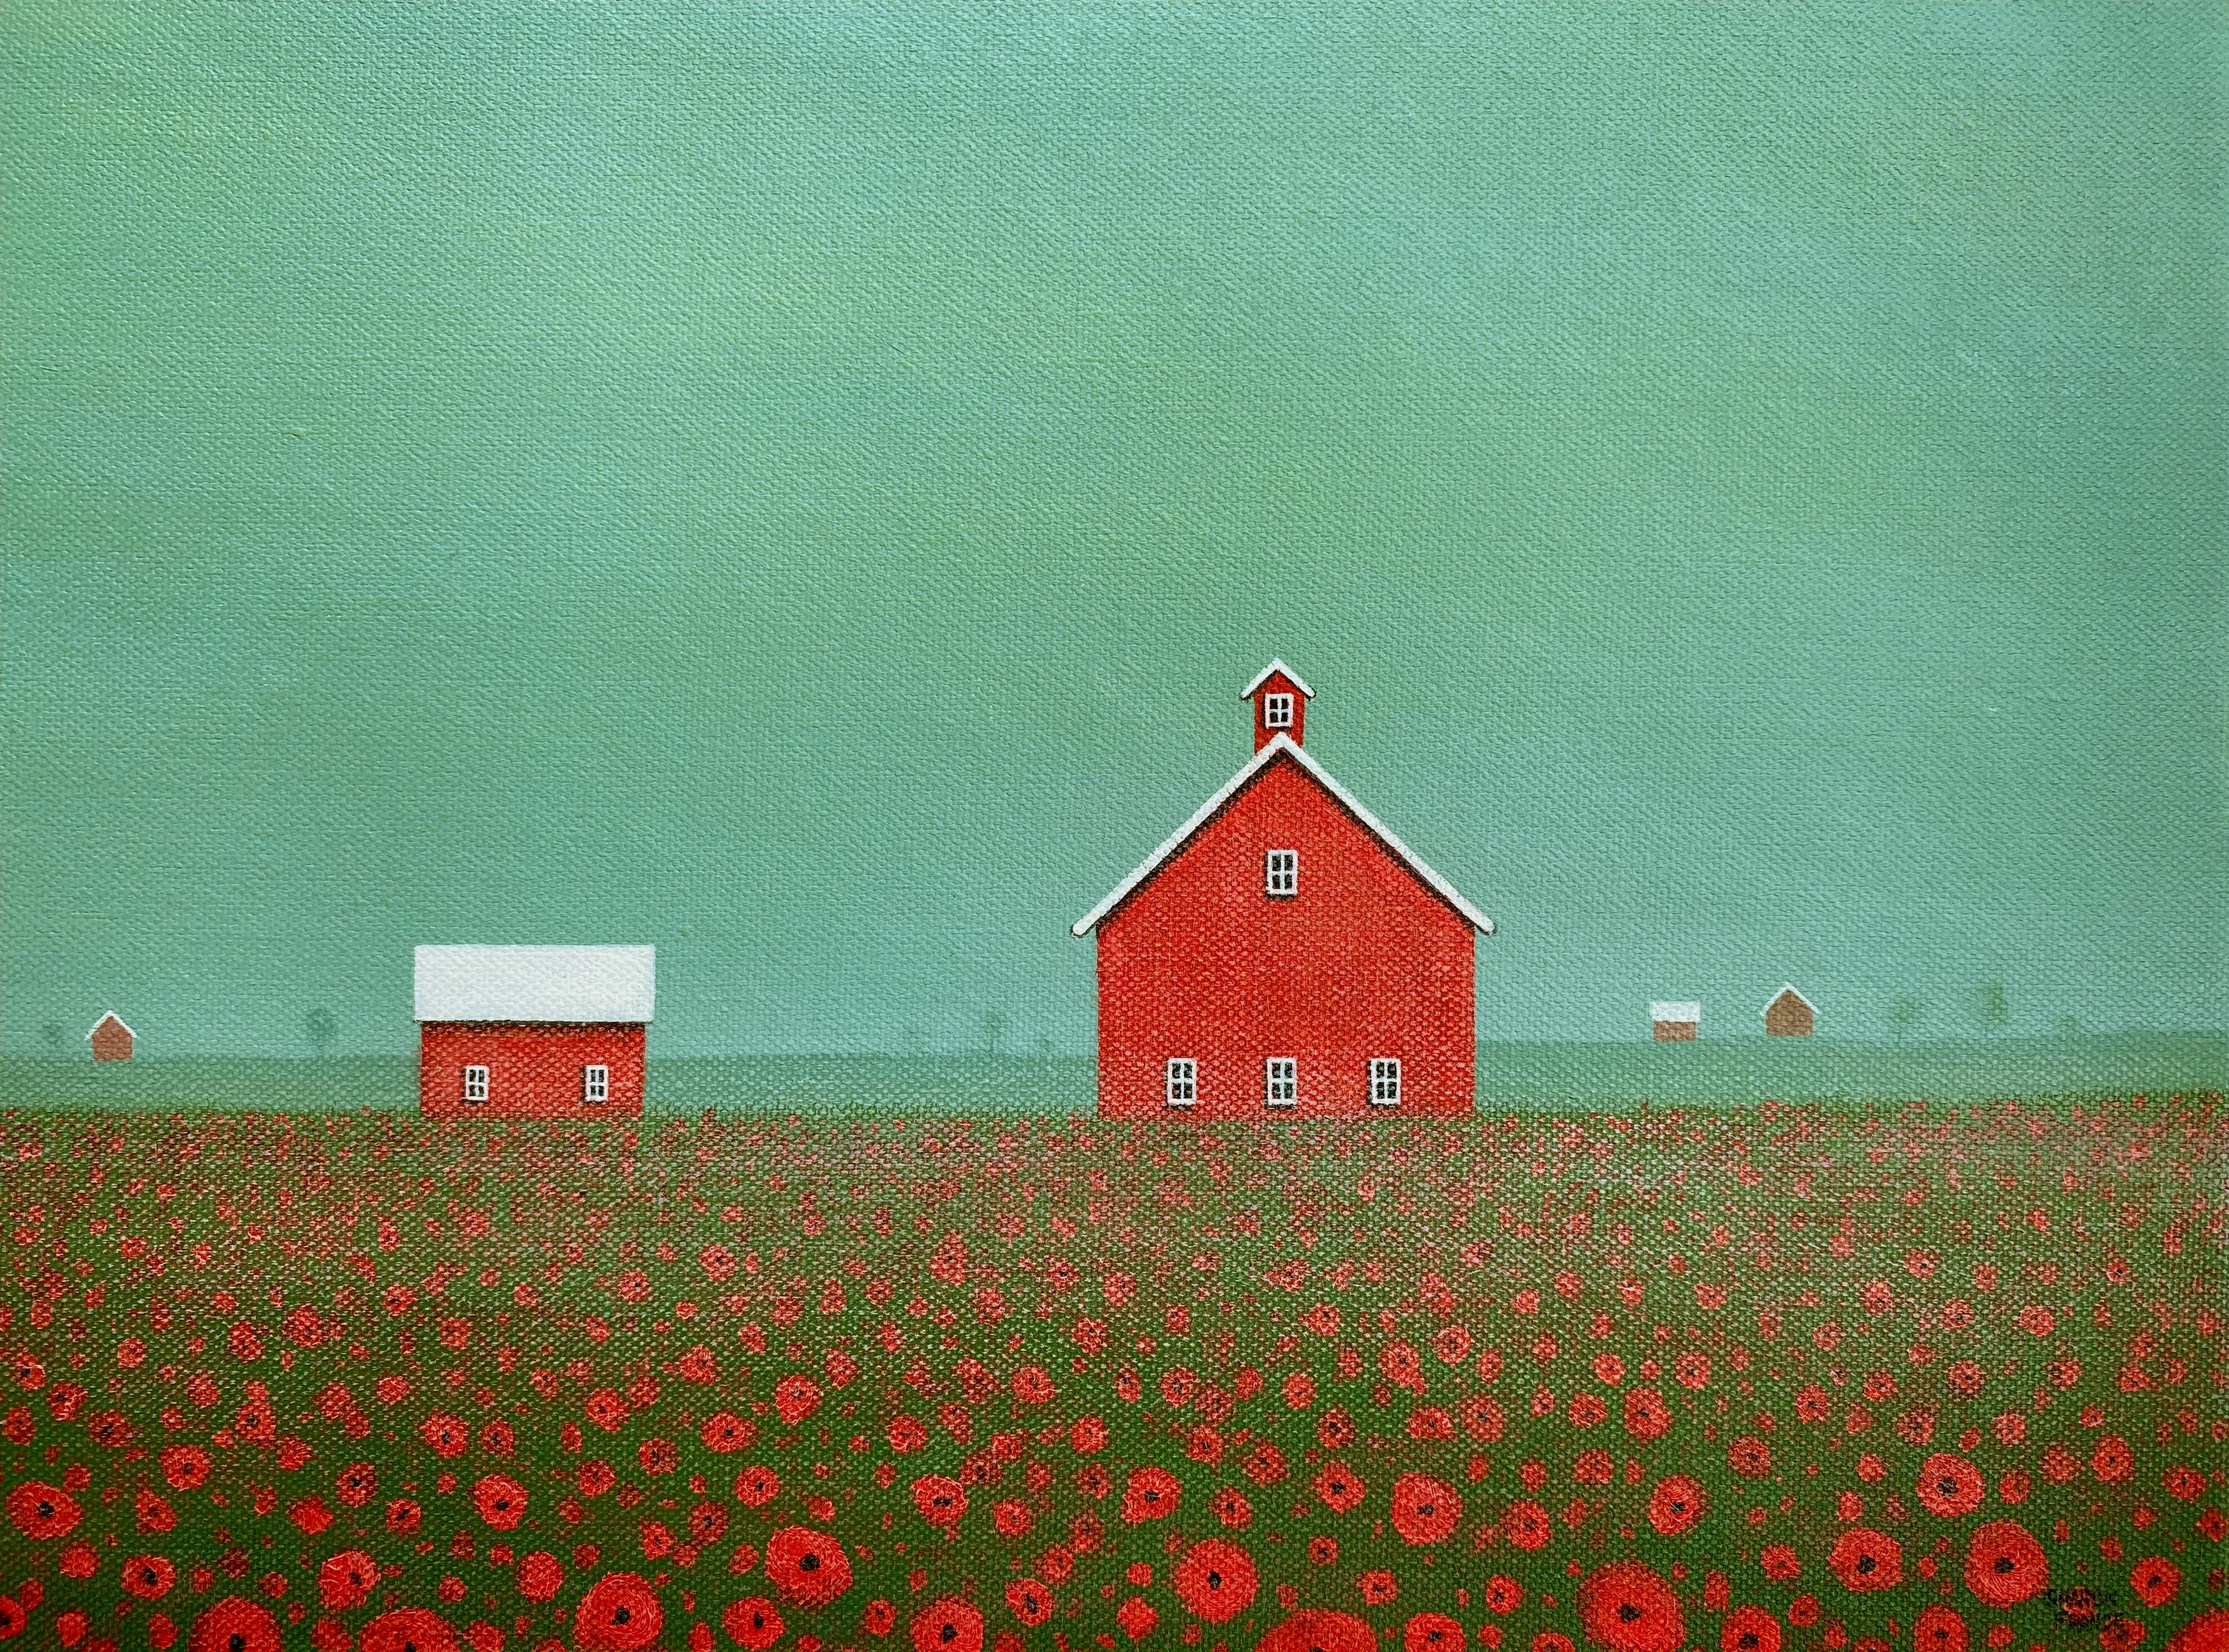 <p>Artist Comments<br>Artist Sharon France depicts a pastoral landscape with farmsteads lining the distance. Red poppies beautifully permeate the expansive field. 